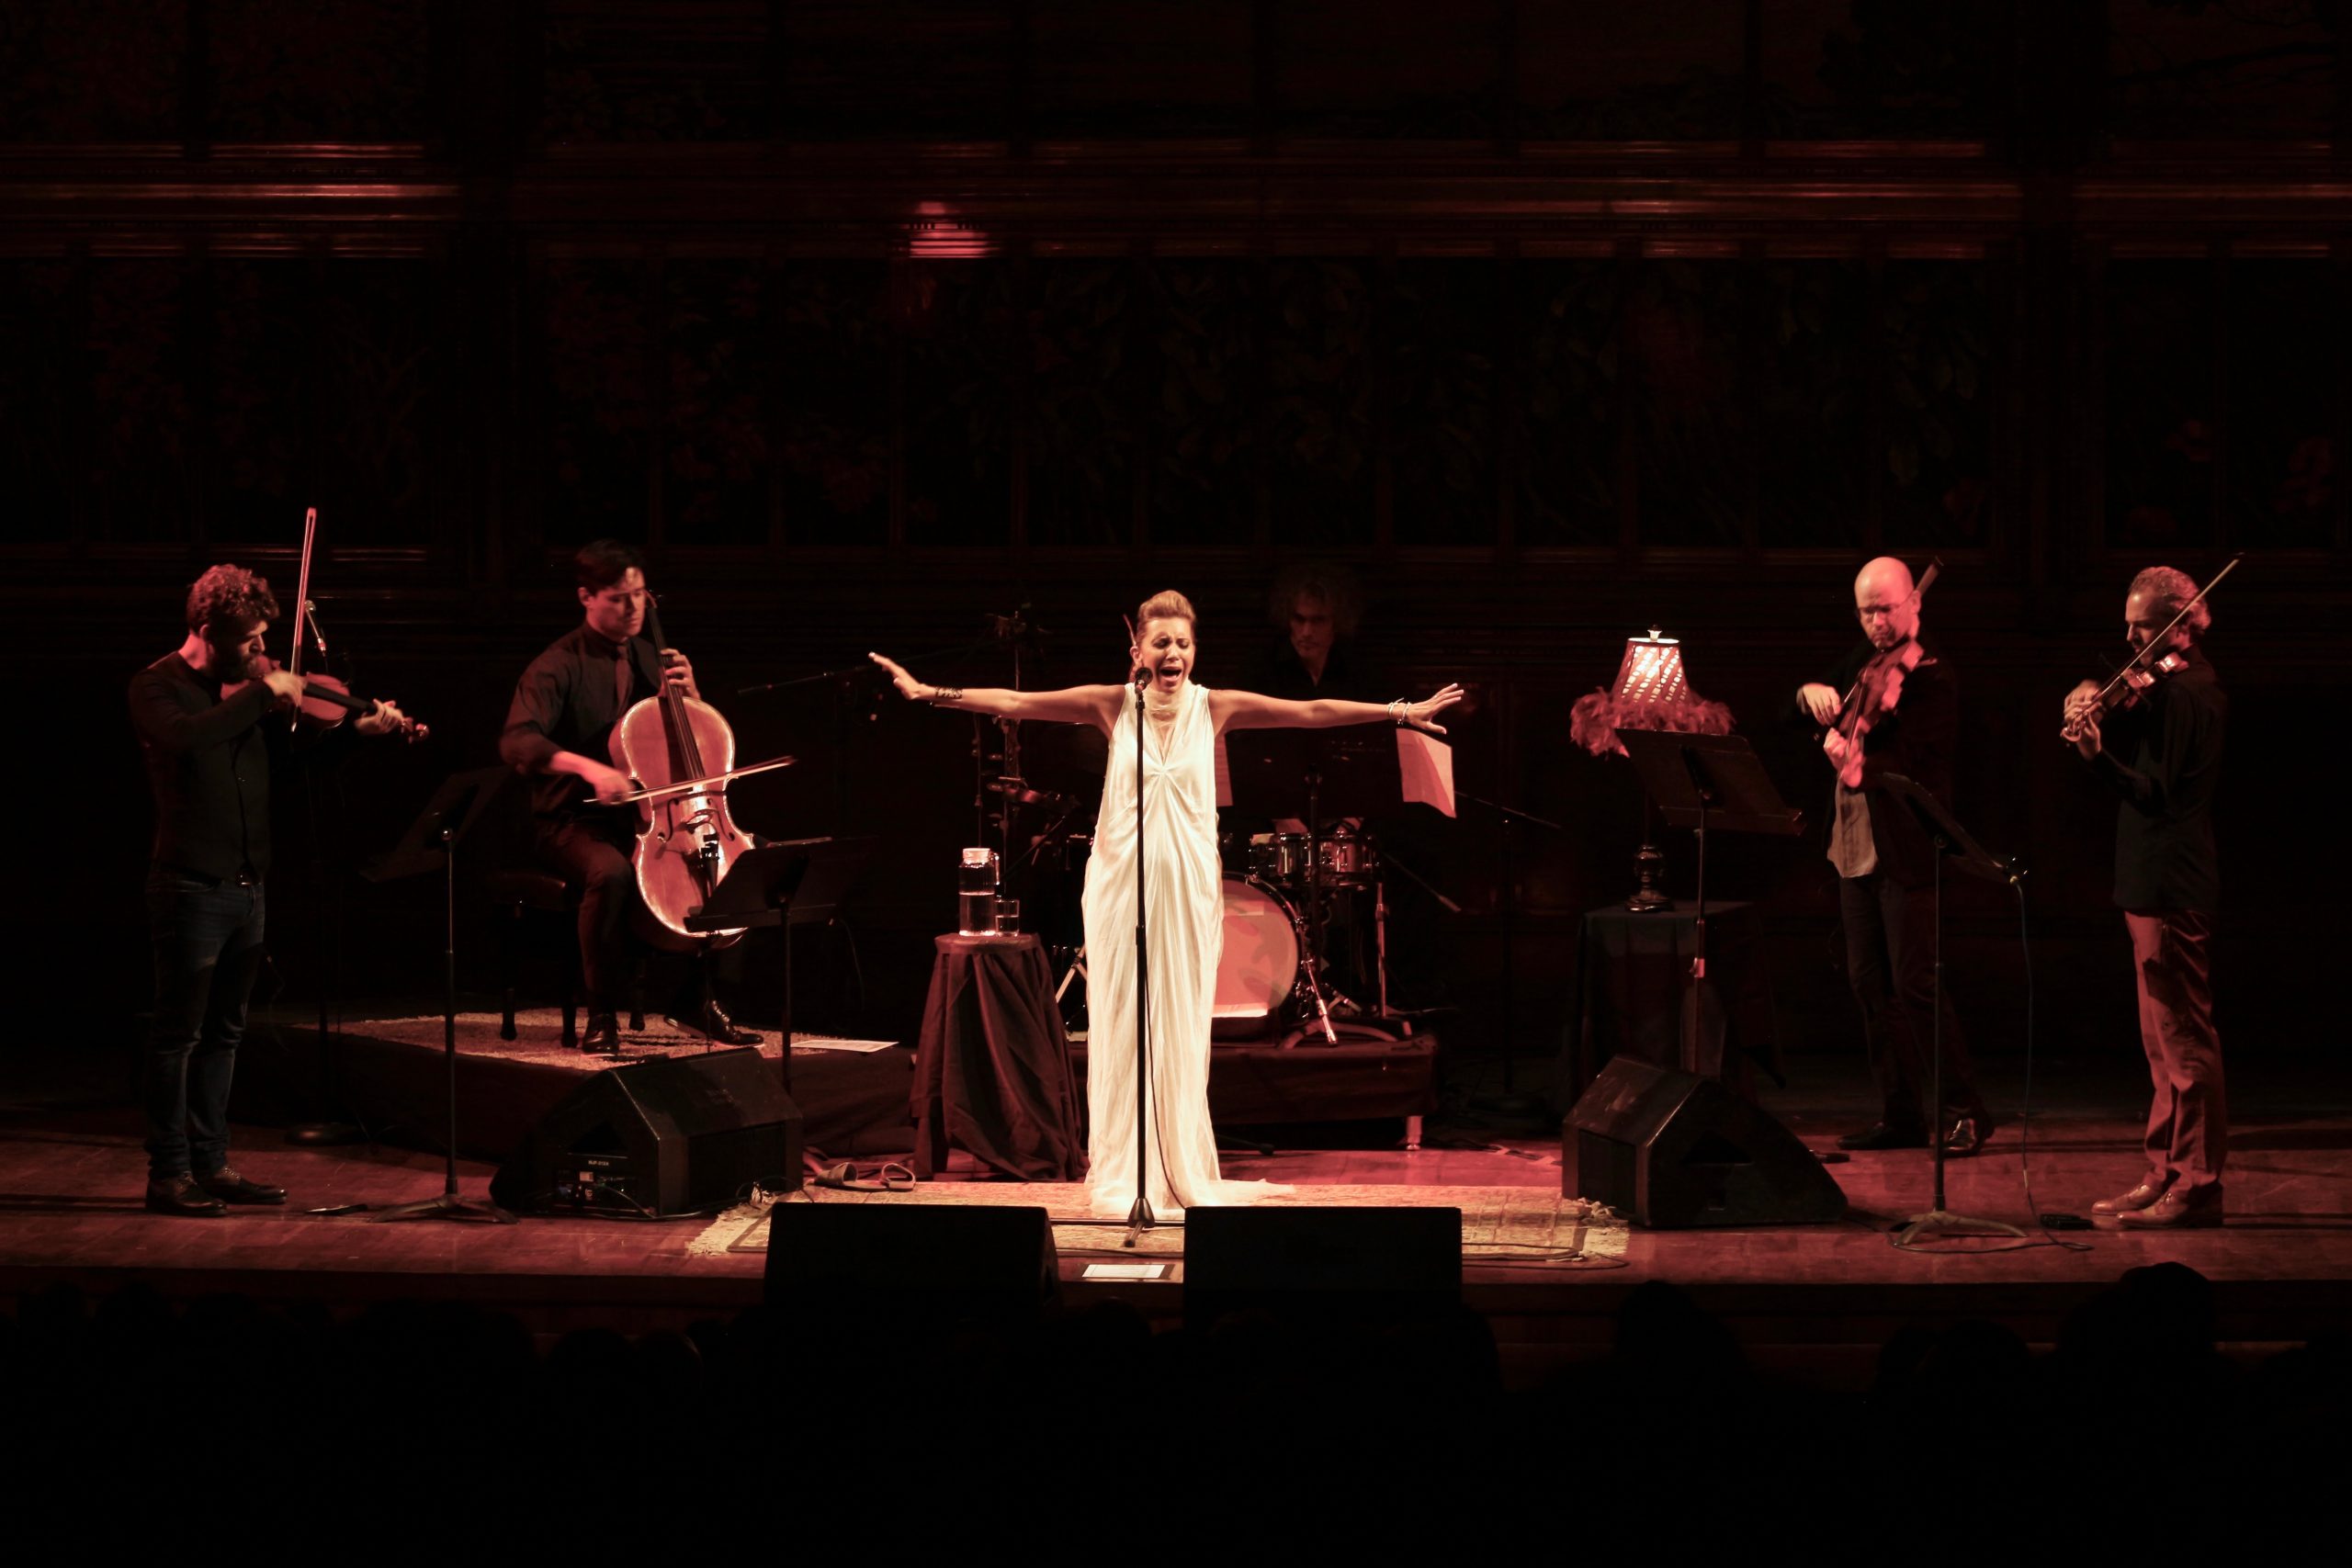 Photo of Magos Herrera singing on stage with her arms outstretched.